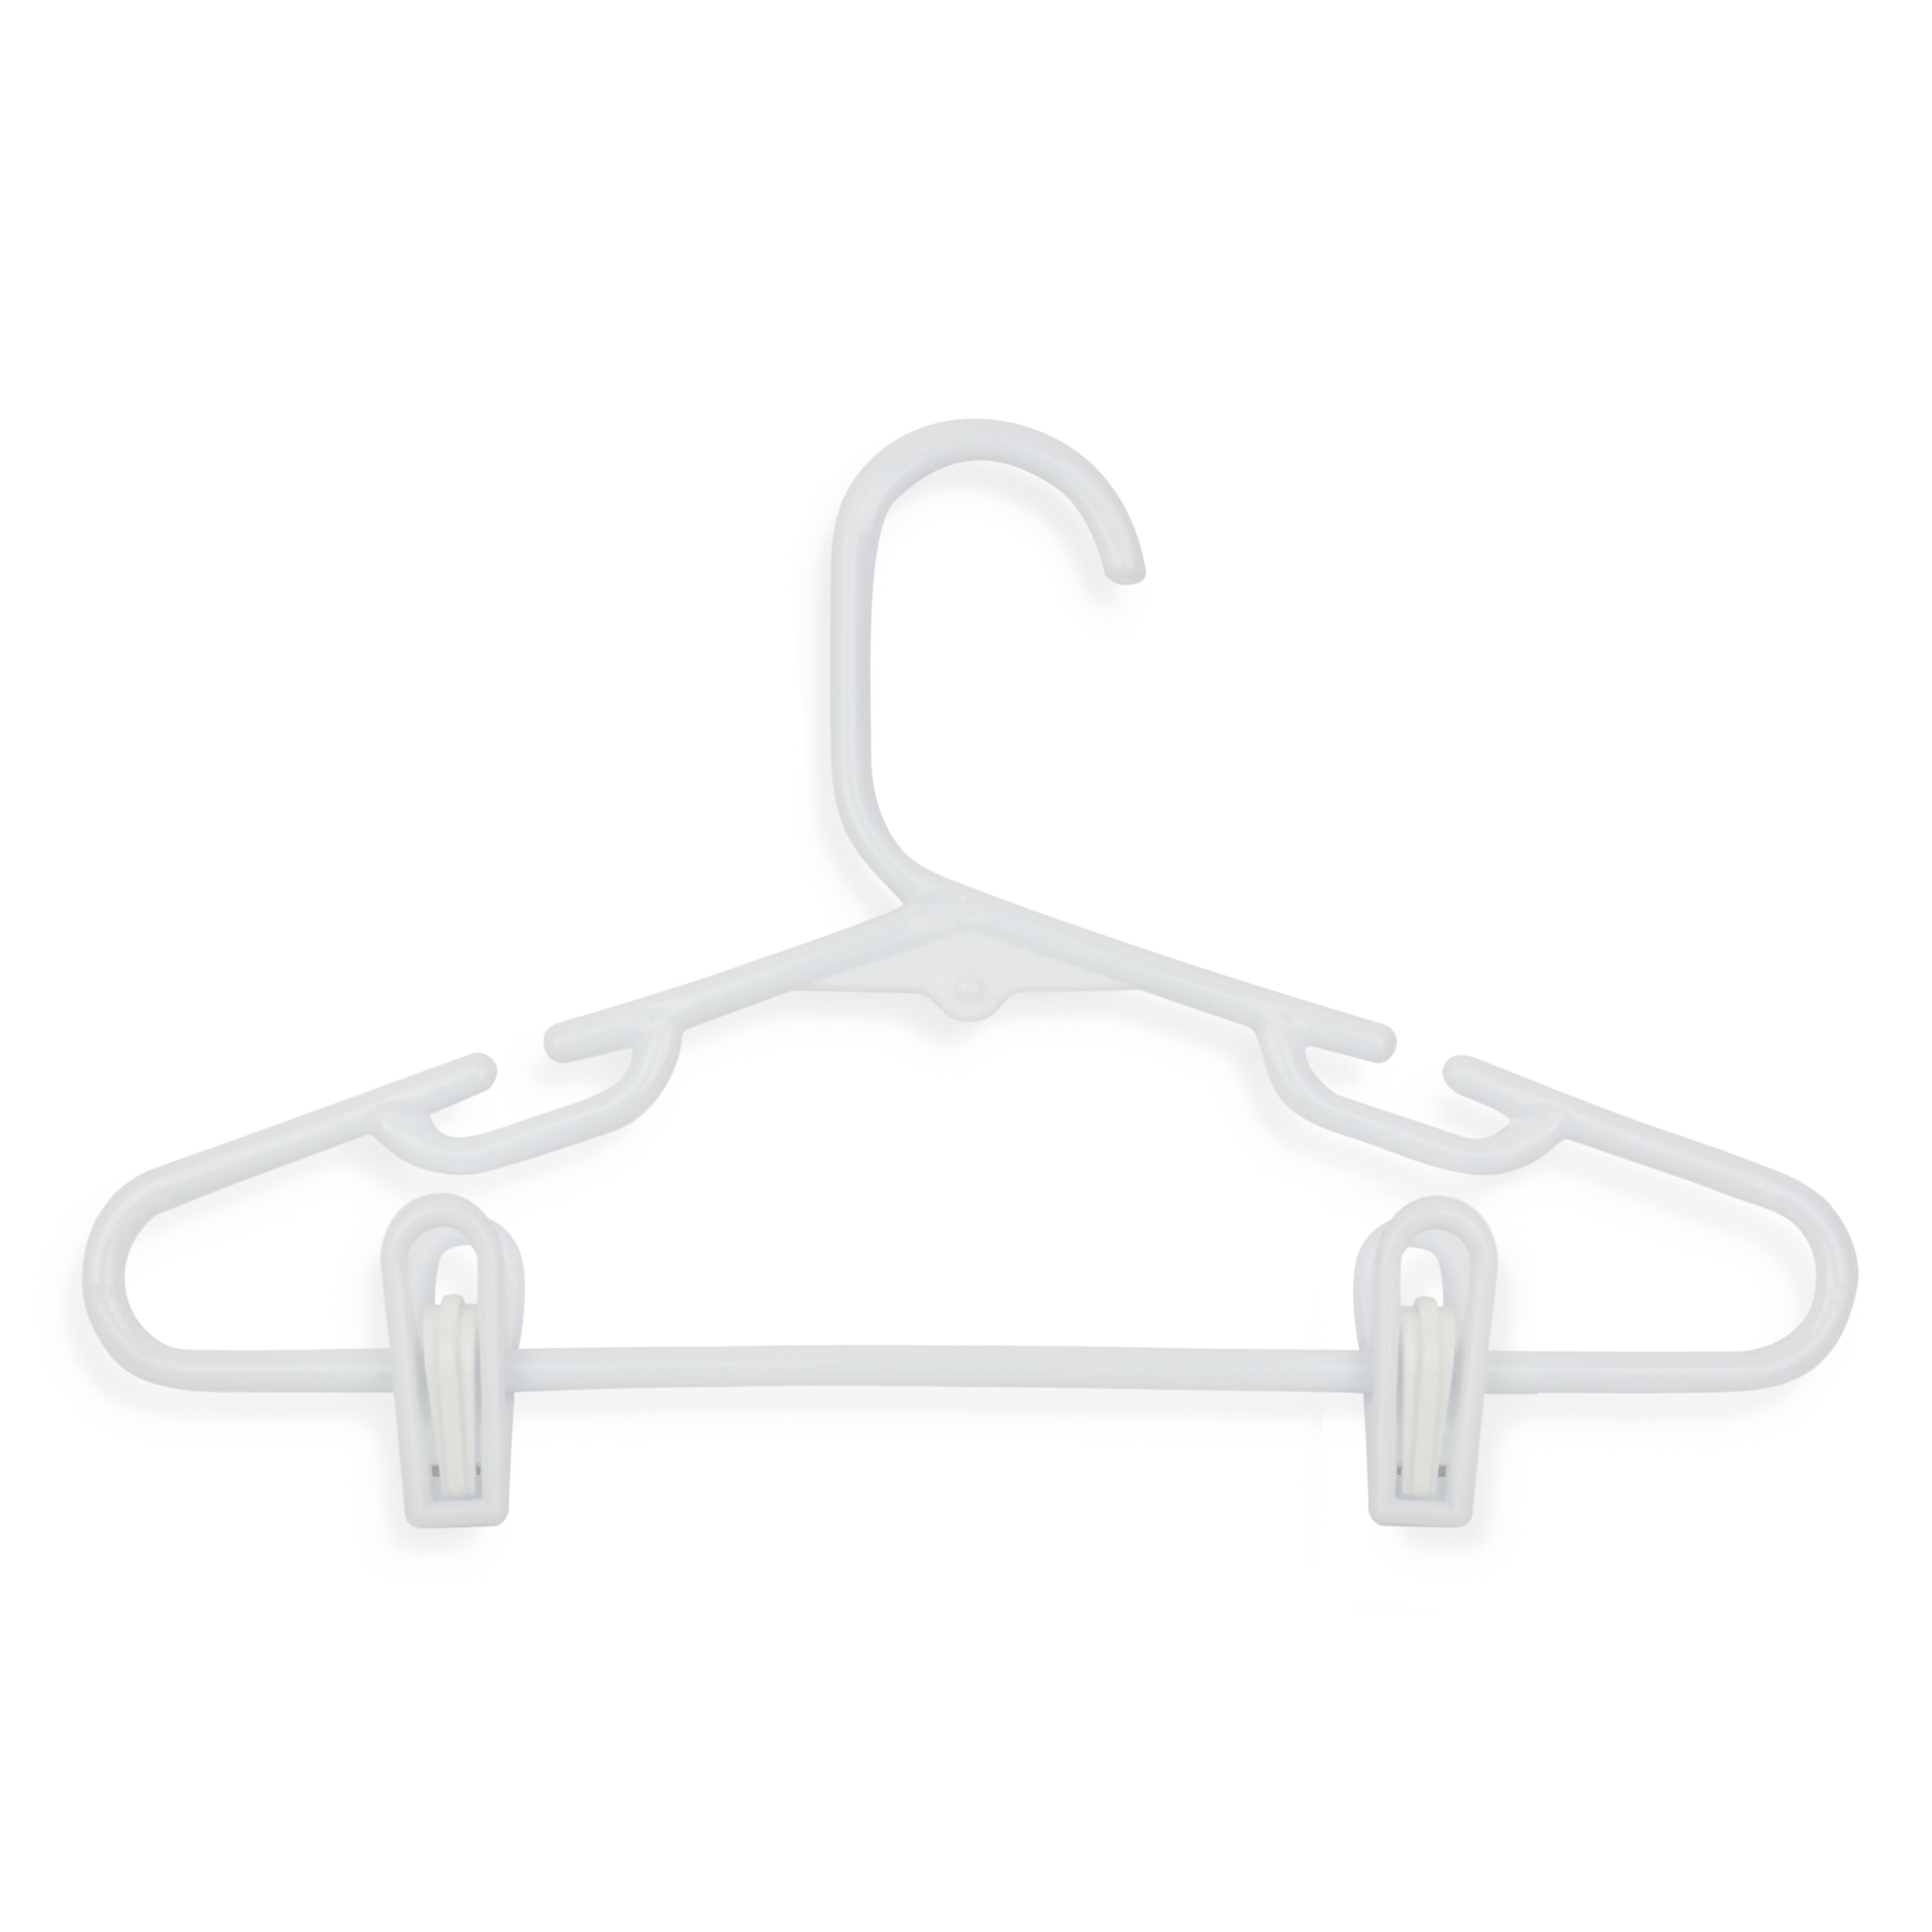 MAPPERZ Plastic Space Saving Clothes Hangers | Multifunctional Smart Closet  Organizer |Wardrobe Clothing Cascading Hanger 9 Slots Shirts Pants Dresses  Coats (4) : Amazon.in: Home & Kitchen